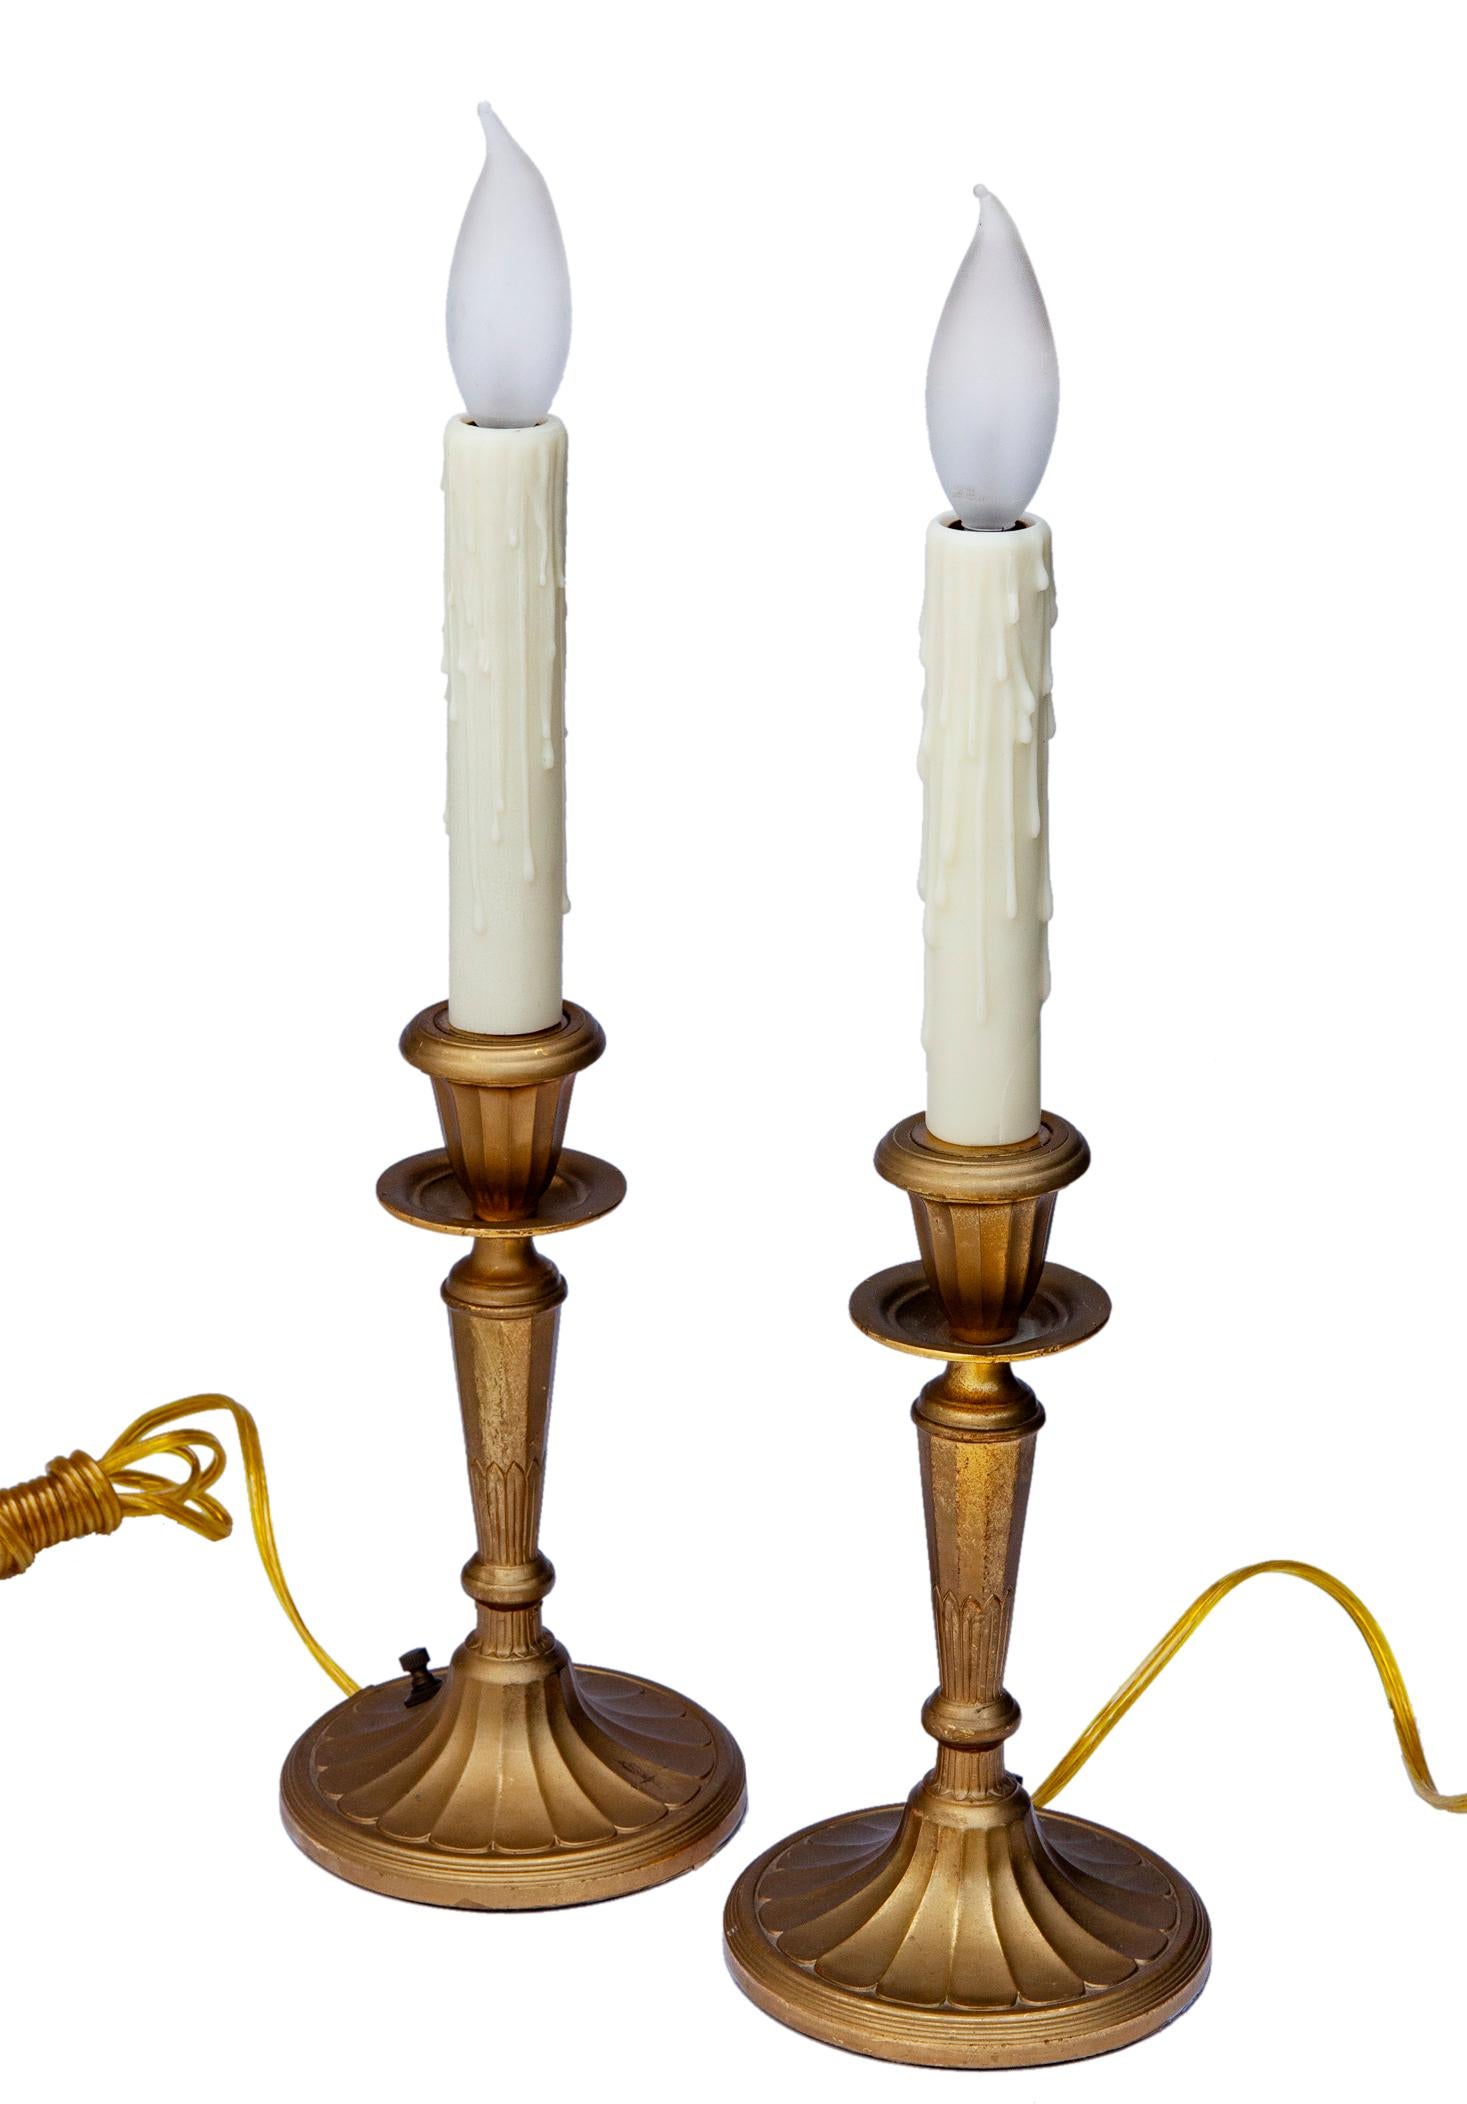 Gilt brass candlestick lamps have been rewired using the original switch on the base.
They have a fluted design on the candlesticks.
The lamps rests on an oval bases. 
They can be used with or without clip-on shades.
 

